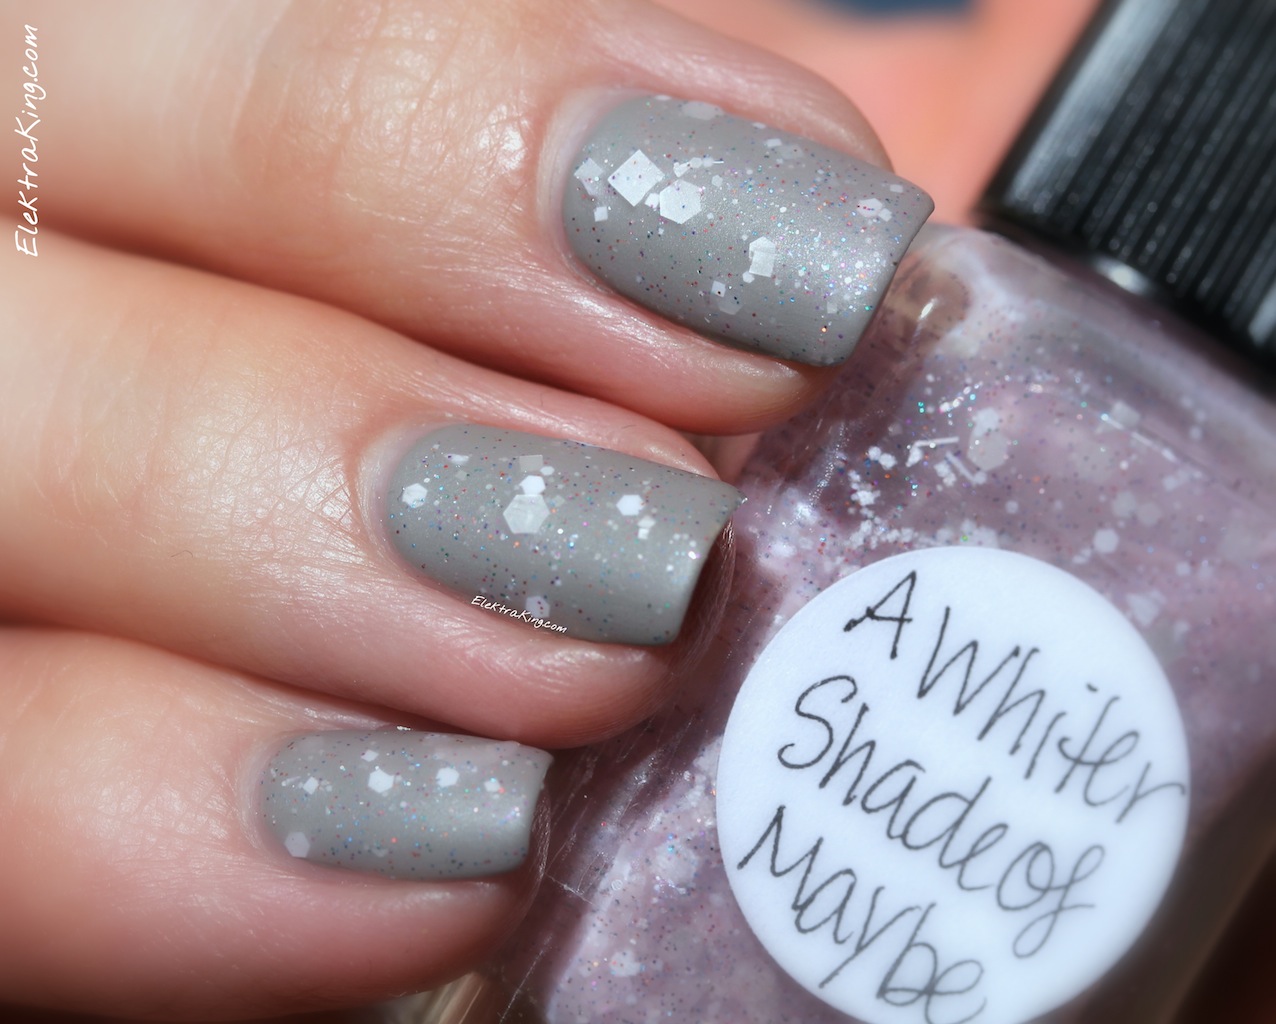 Lynnderella A Whiter Shade Of Maybe over OPI French Quarter For Your Thoughts